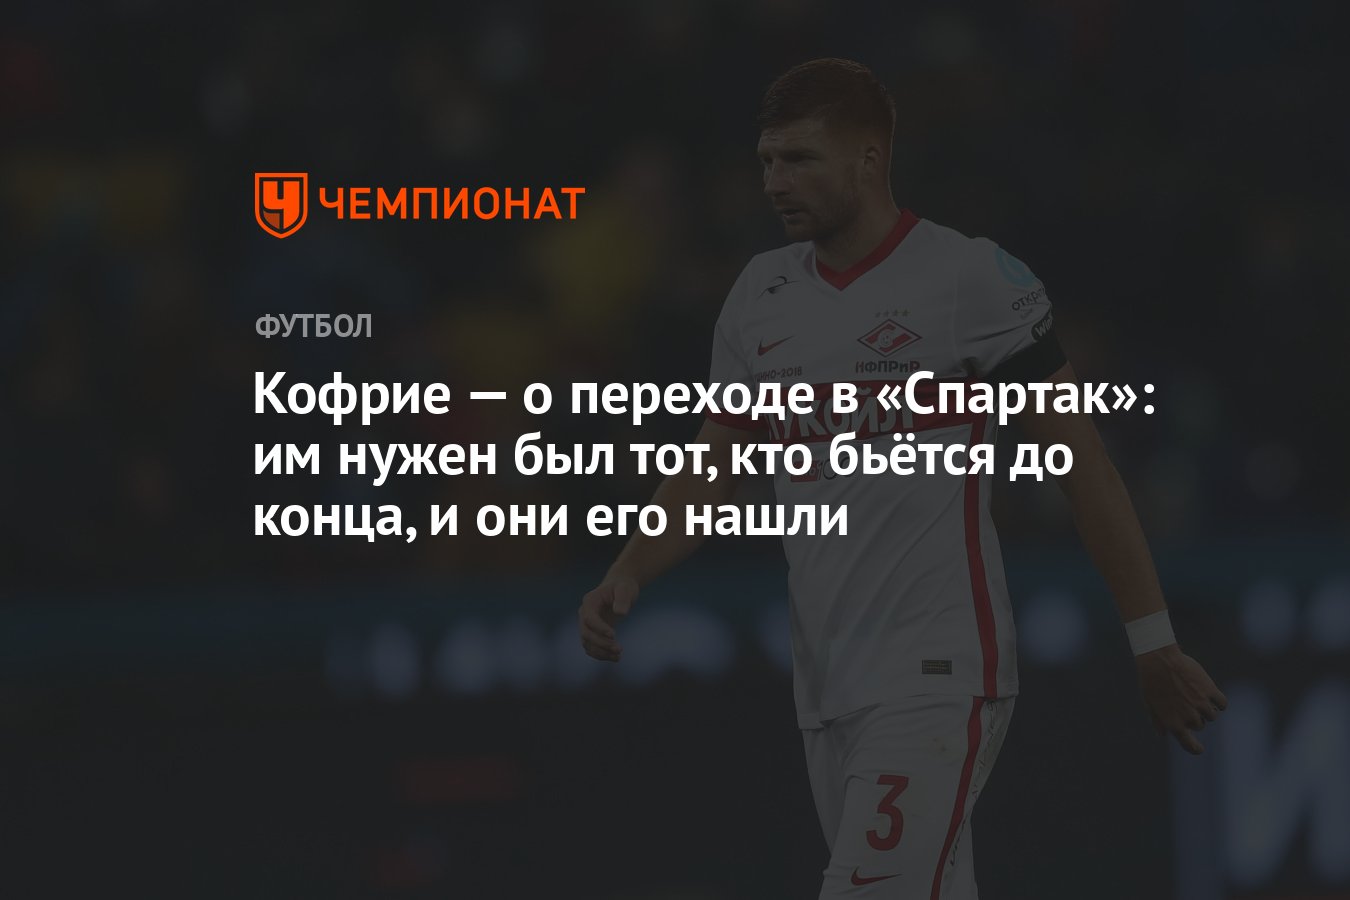 Kofrie - about moving to Spartak: they needed someone who fights to the end, and they found him thumbnail